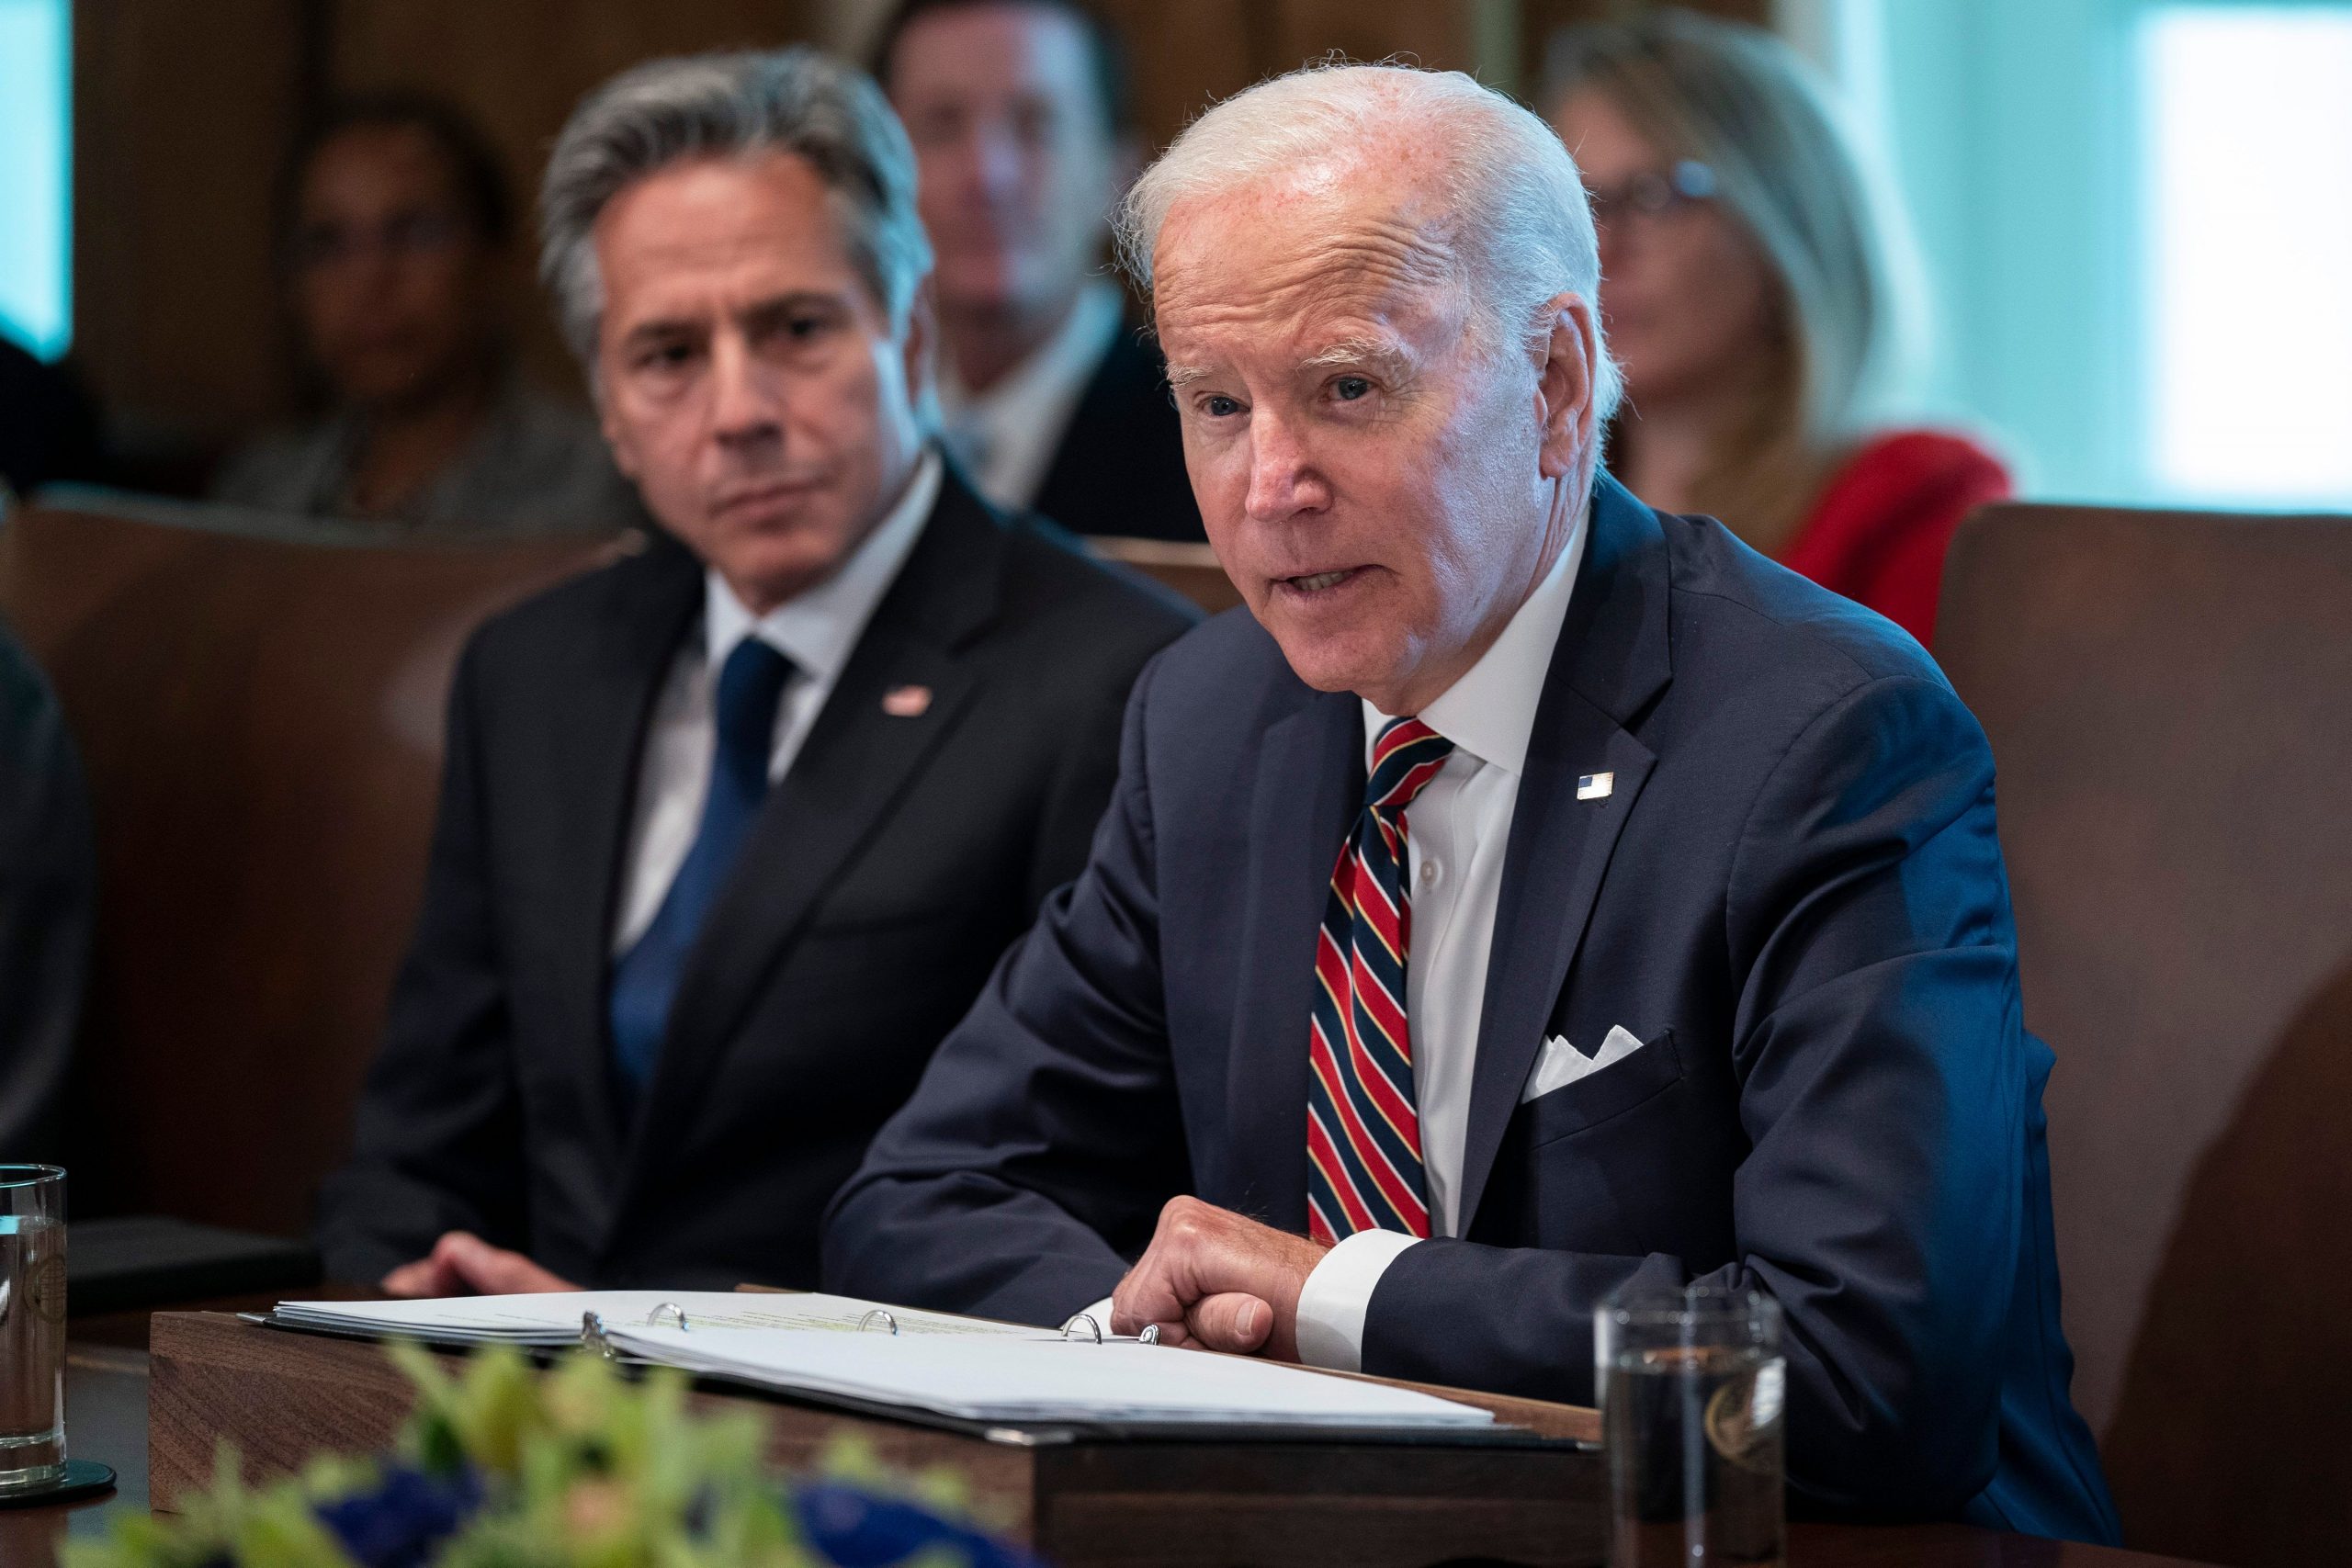 UN General Assembly: Joe Biden to announce additional funding to counter global food shortages